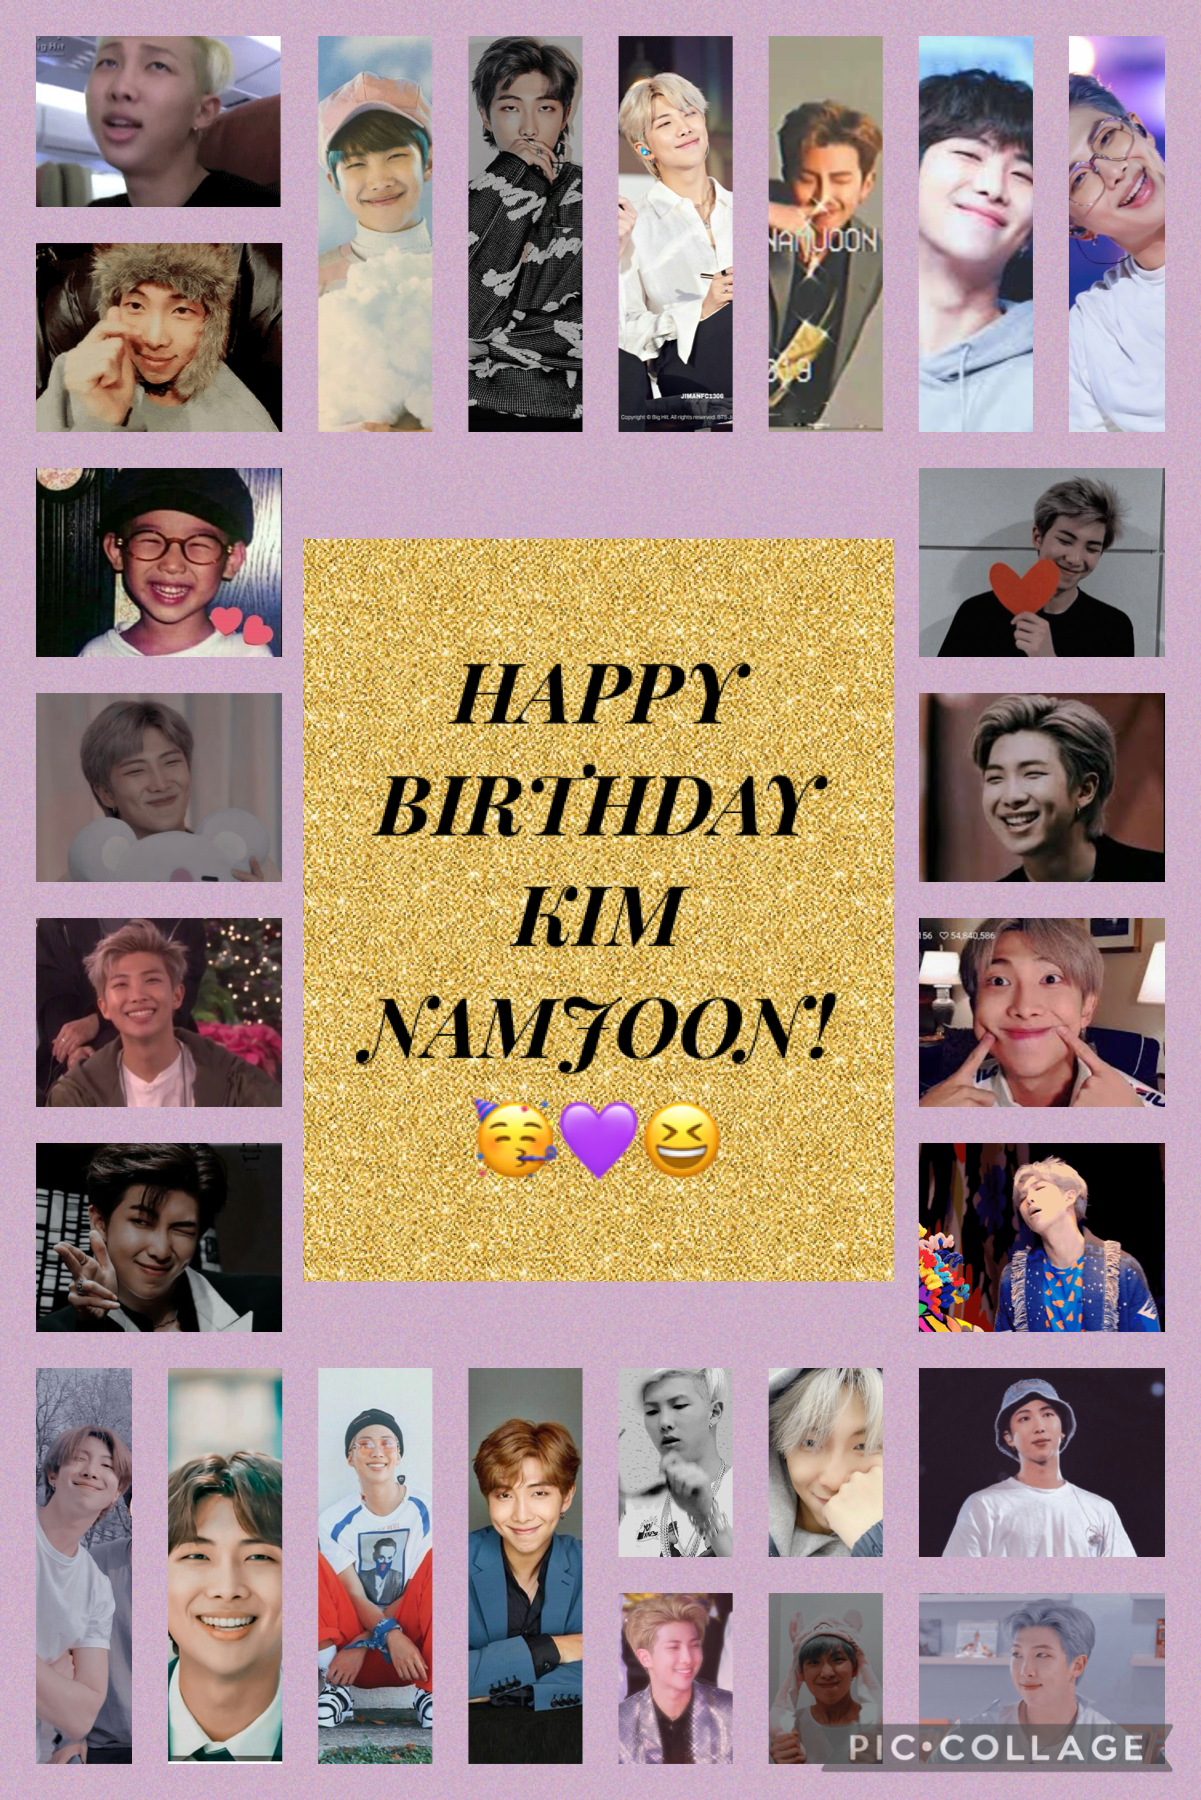 Happy birthday to our wonderful leader, Kim Namjoon!!! 💜Going on a strong 8 years with his amazing BTS family✊ 사랑해😘💜💜